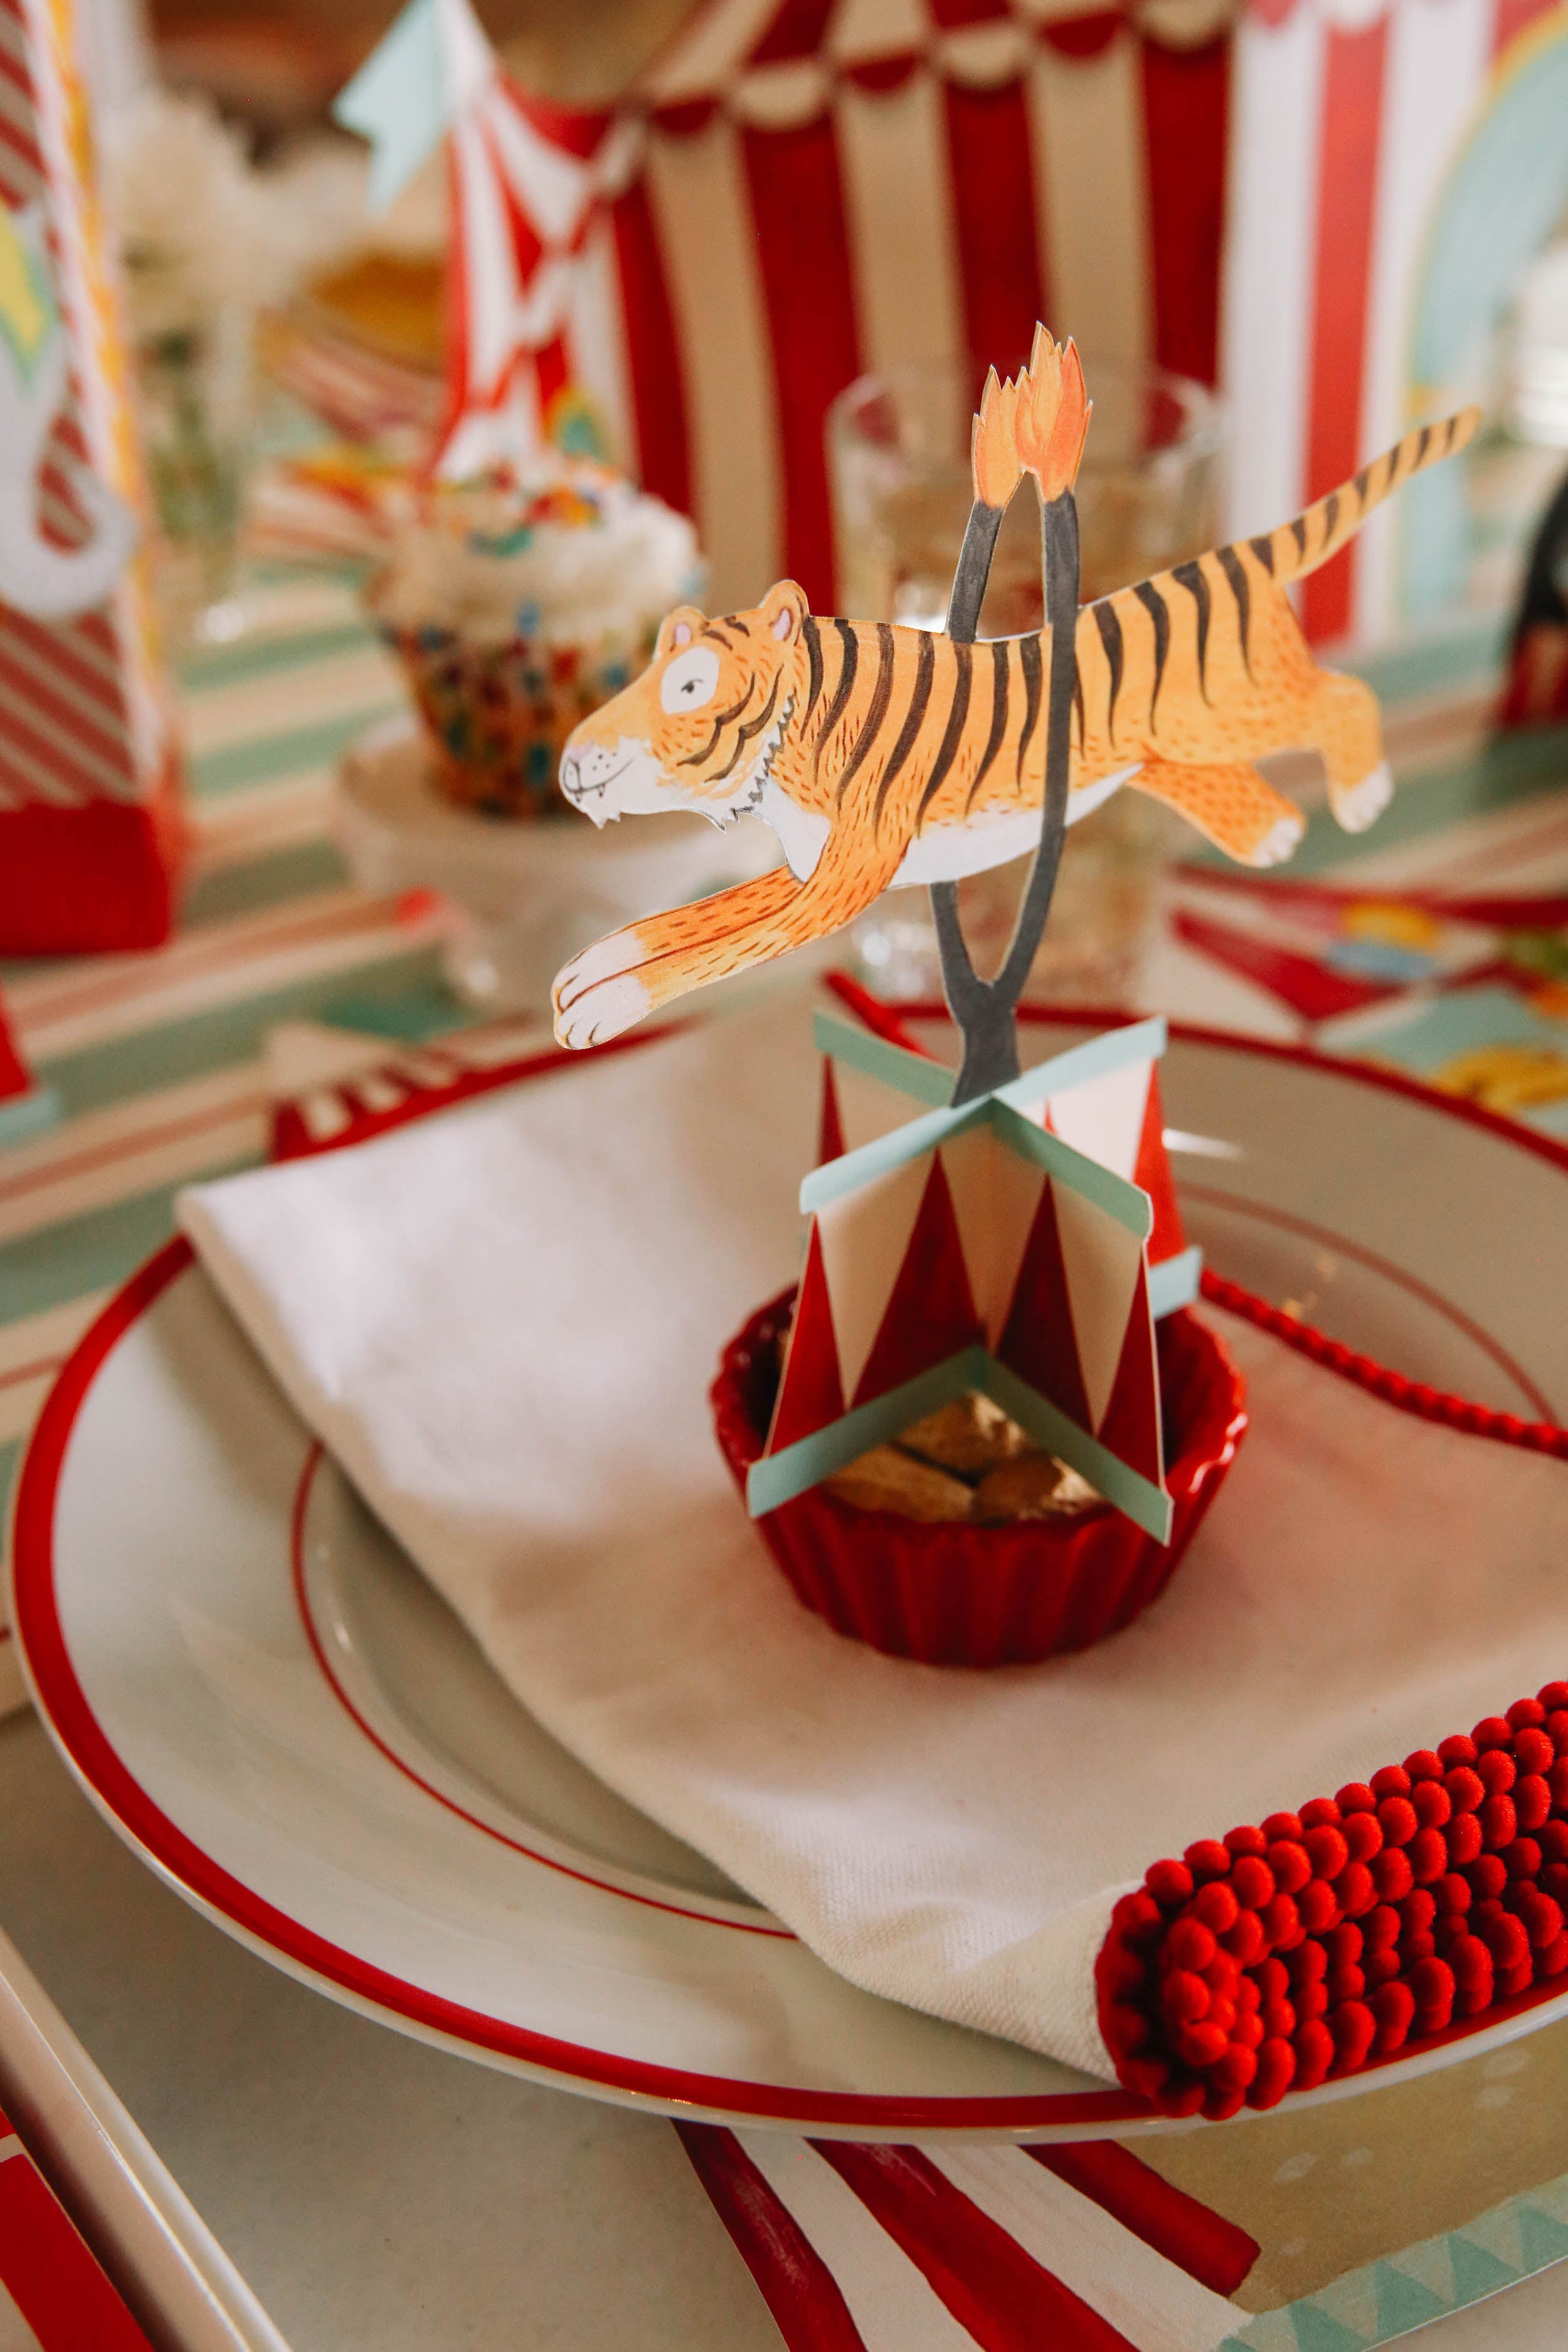 The Tiger Circus Trio Table Ornament sitting atop the plate in a circus-themed place setting.